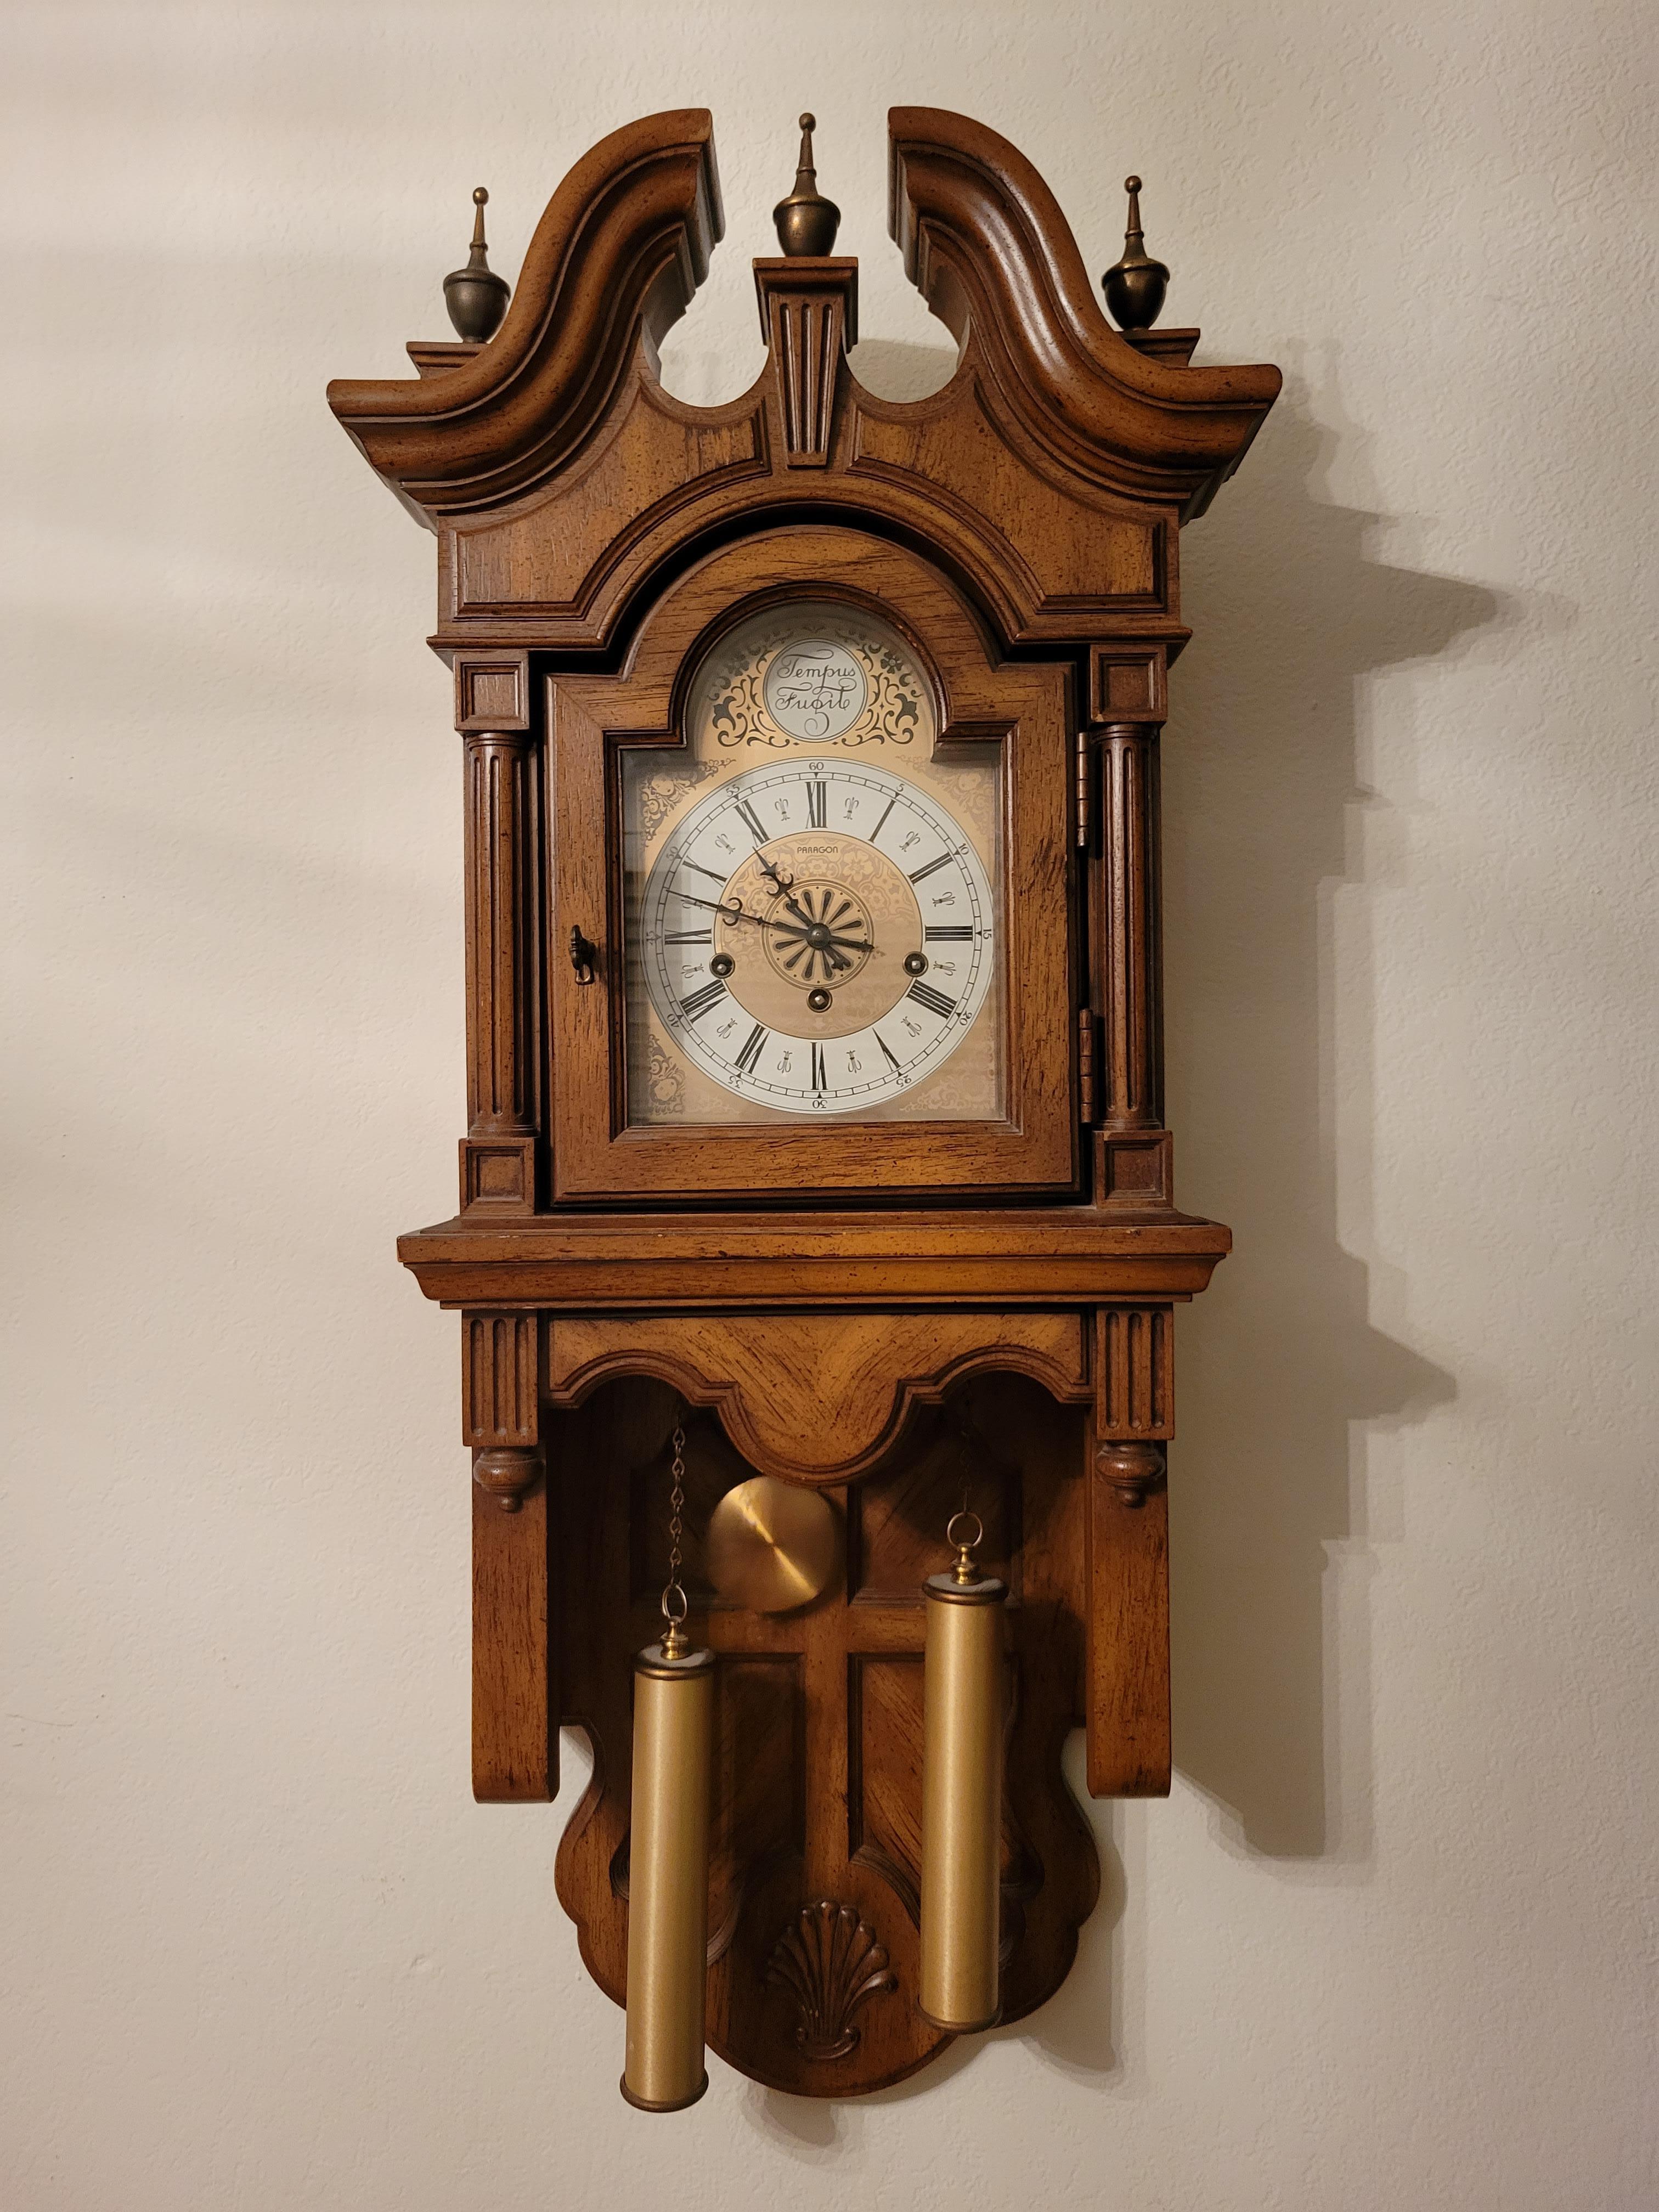 Vintage Paragon wall clock with Franz Hermle movement with a beautiful Westminster chime. It chimes 4 notes on 15 minutes, 8 notes at 30 minutes, 12 notes at 45 mintes and 16 notes on the hour.  The movement winds up with a key. The weights serve as